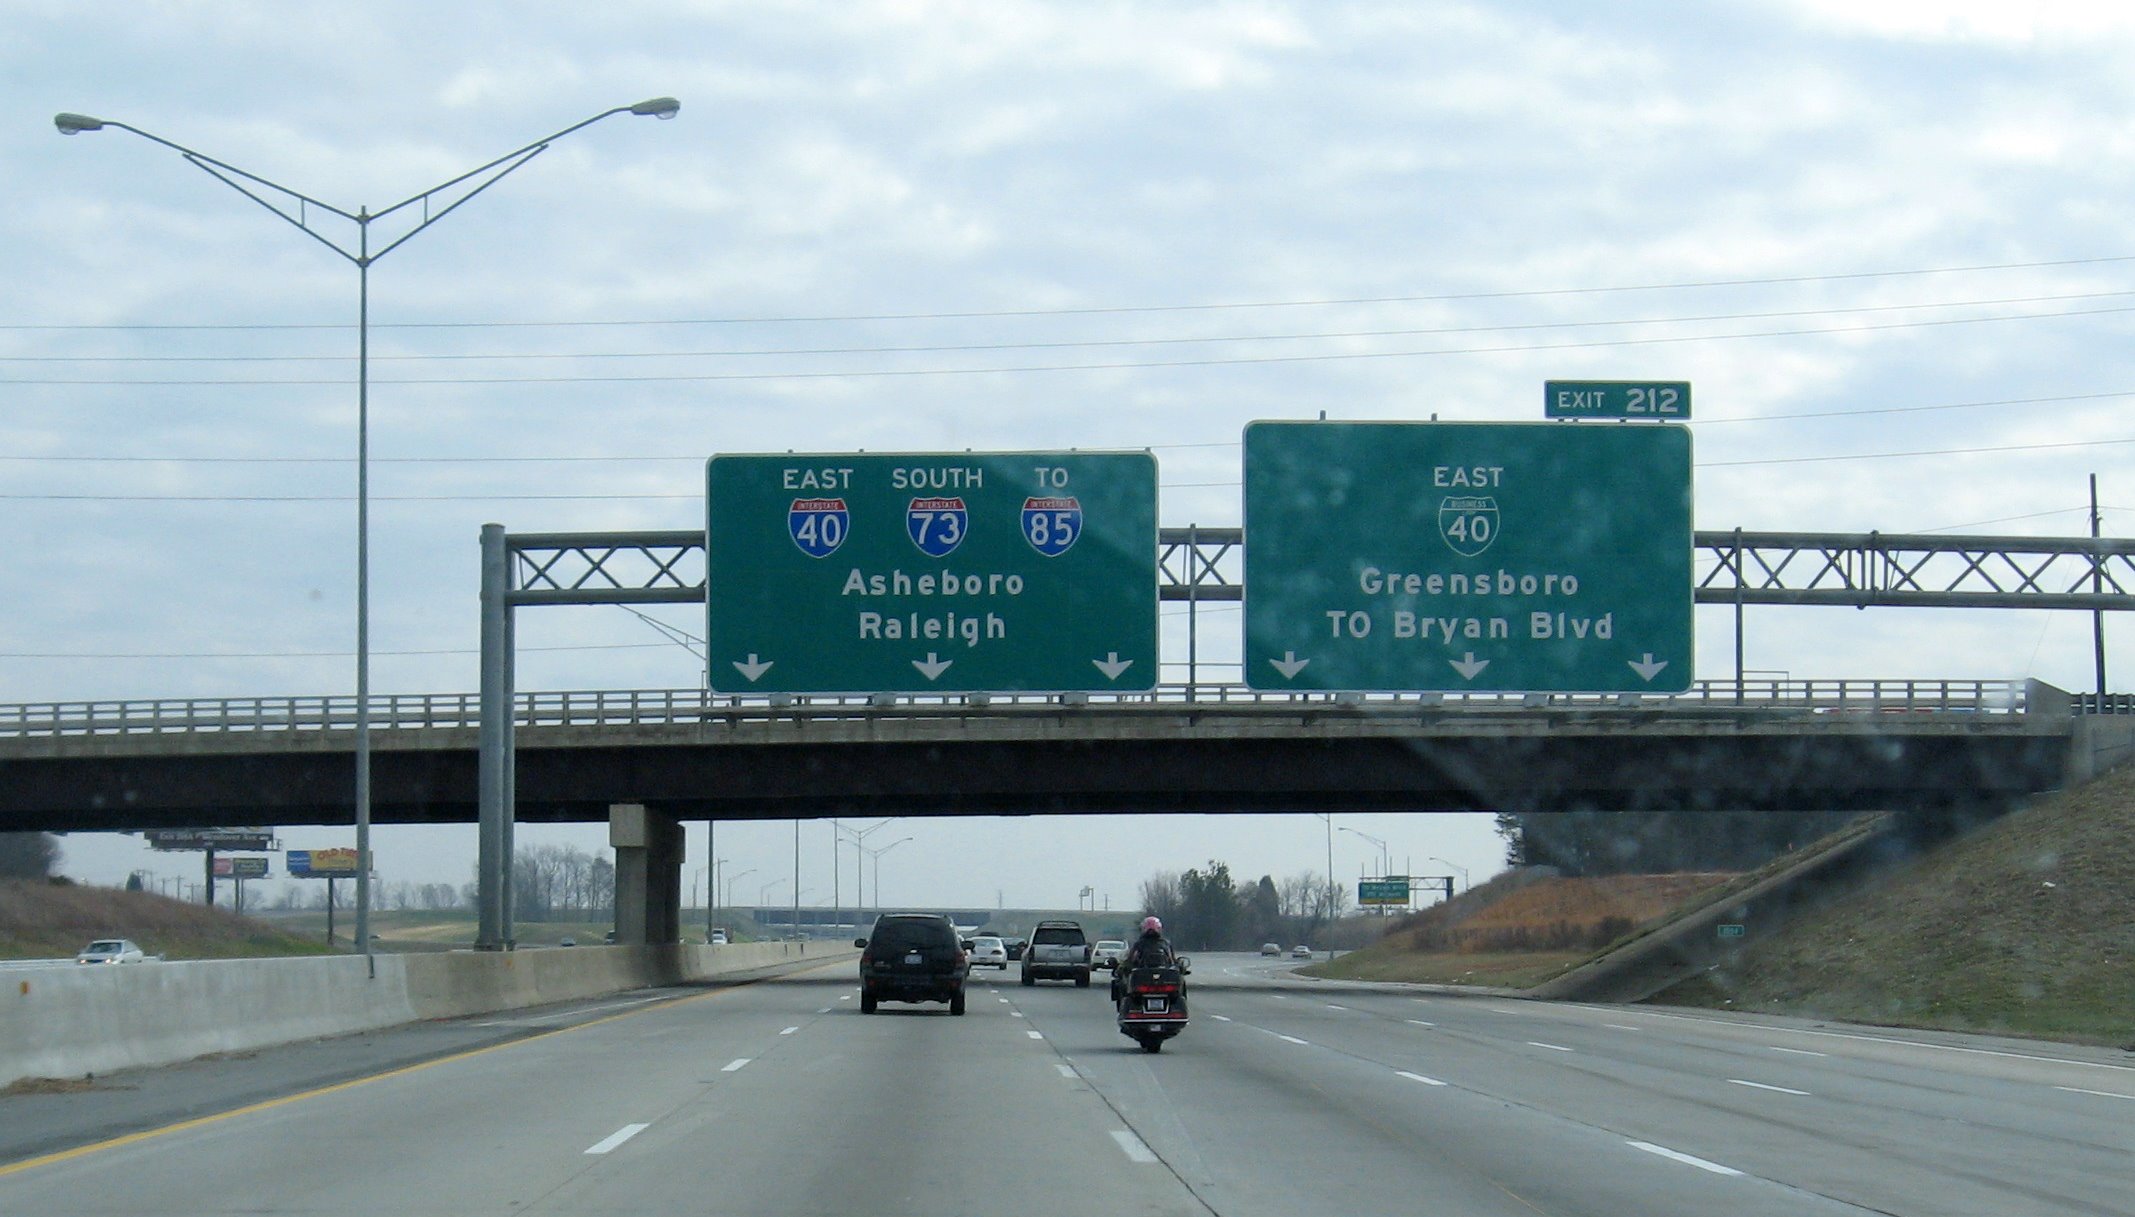 Photo of exit signage of I-40 East for Greensboro Loop, before I-40 was moved
back on old alignment, Dec. 2008